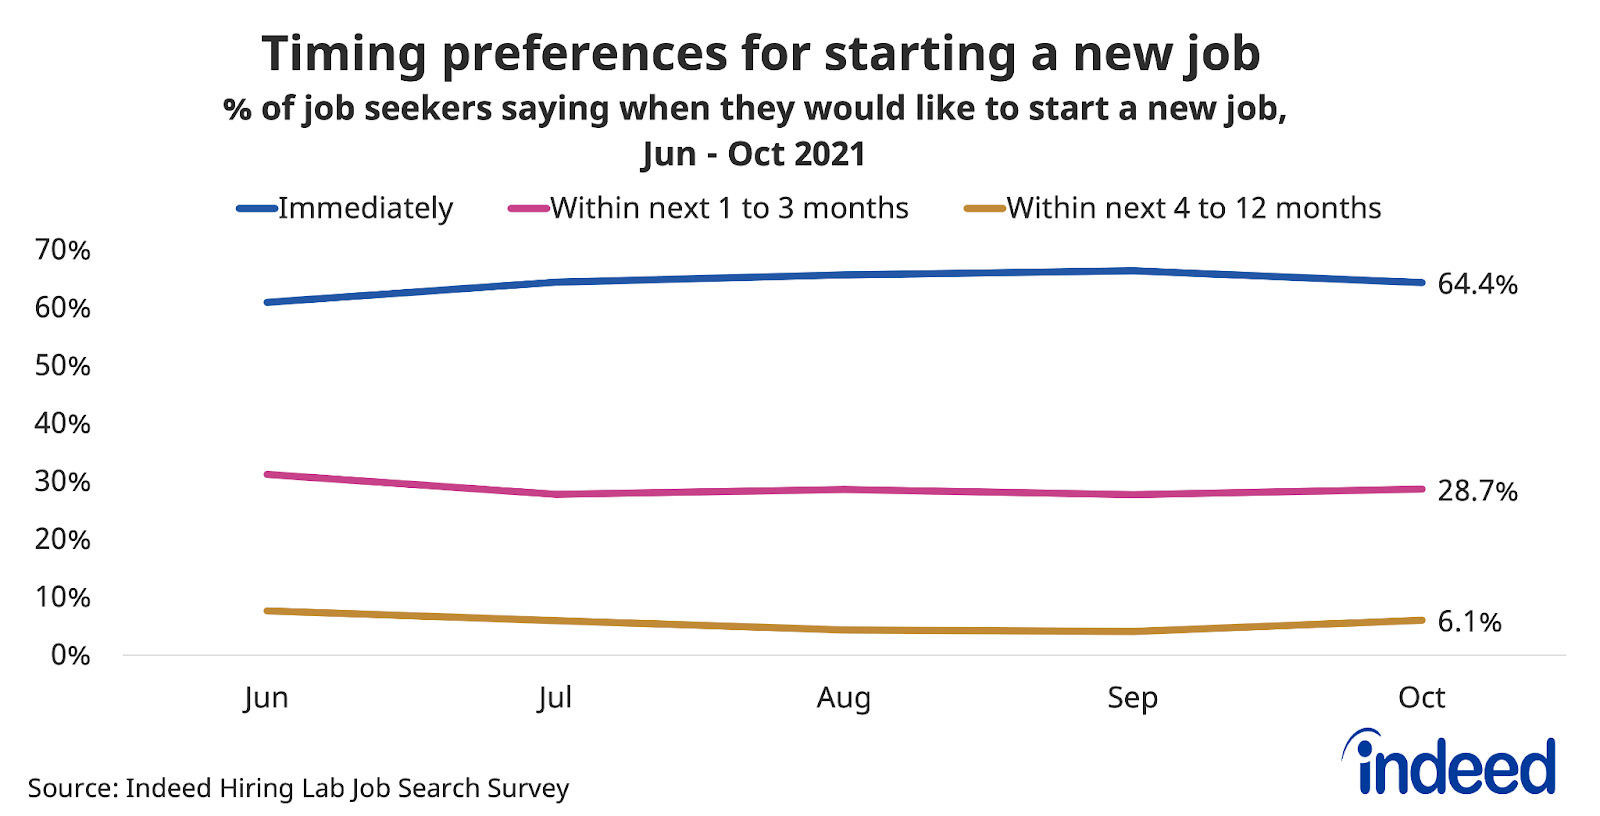 Line chart titled “Timing preferences for starting a new job.” 